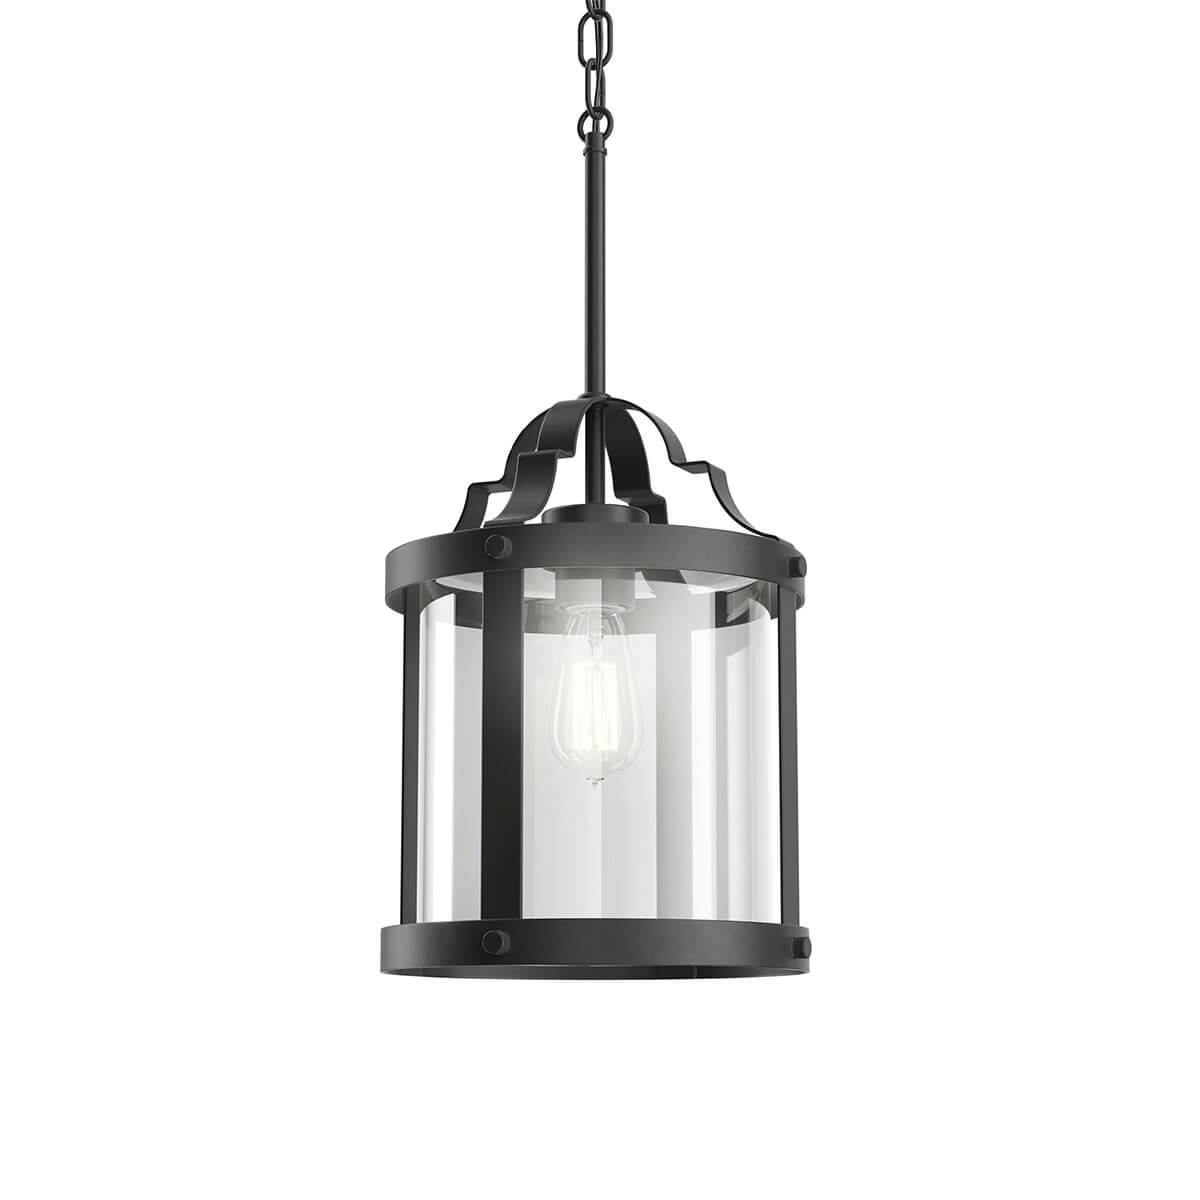 Farona 11" 1 Light Black Pendant Light without the canopy on a white background